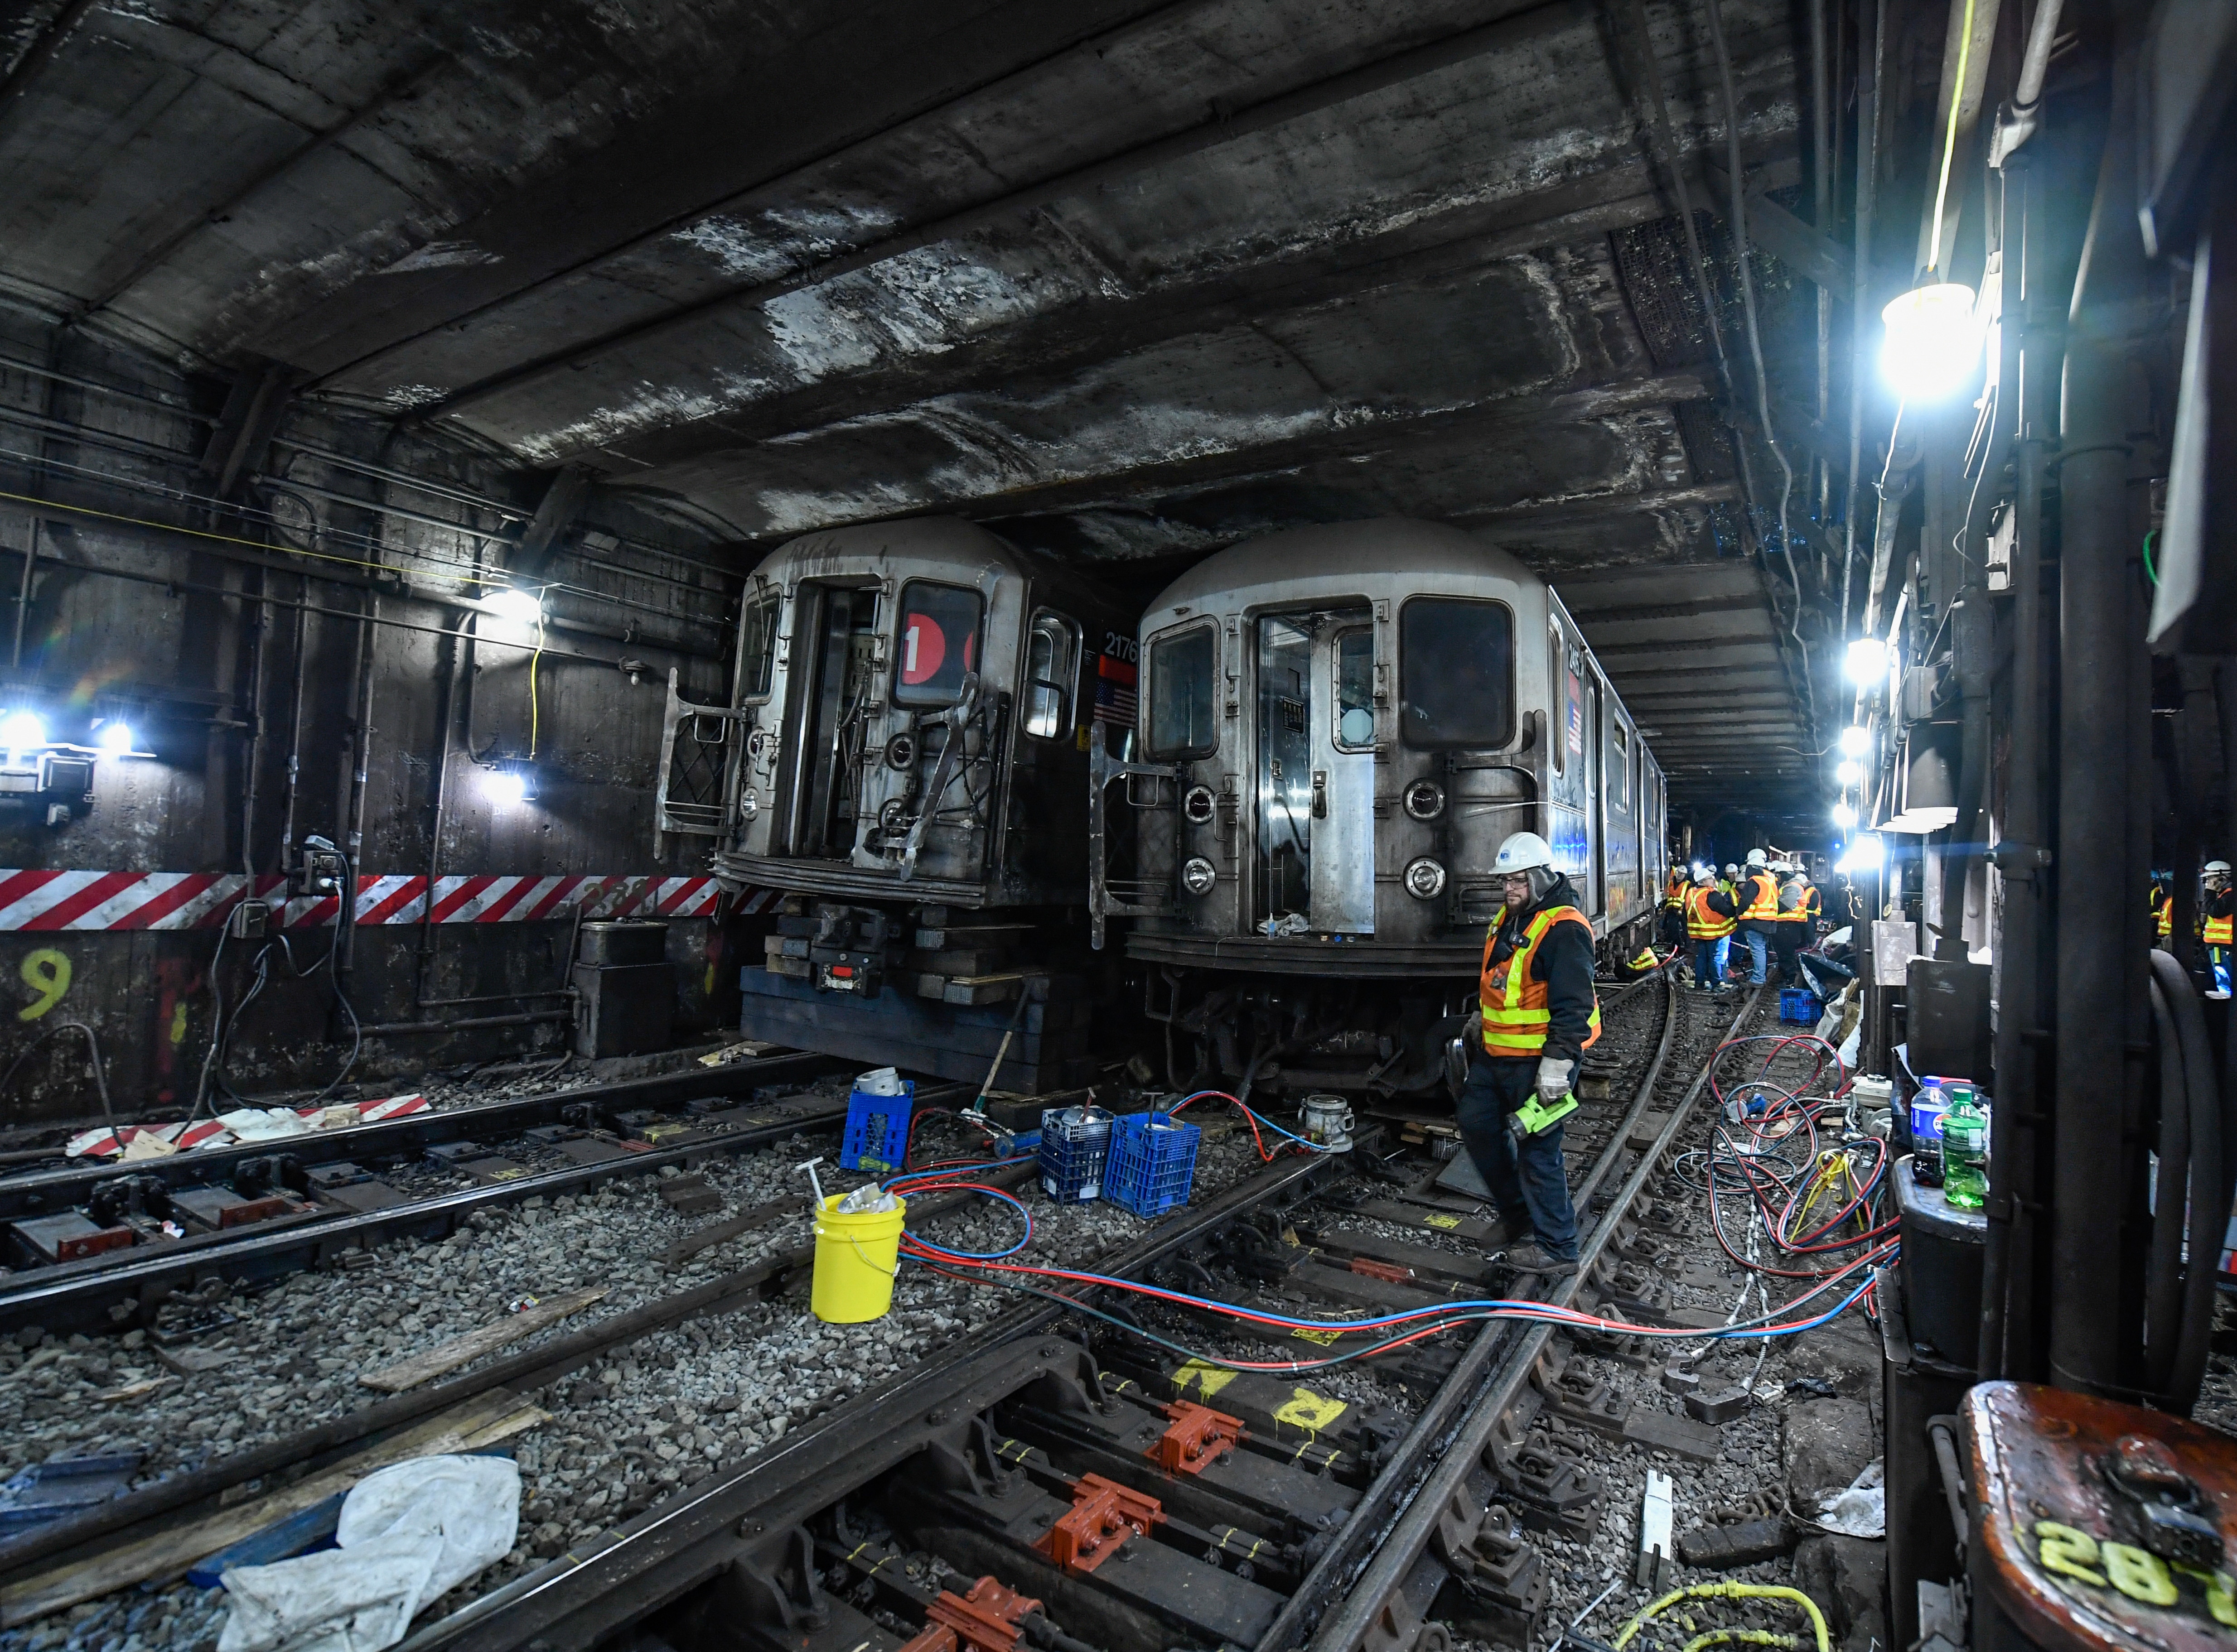 ICYMI: Governor Hochul Announces Full Service to be Restored on 1 2 3 Lines Overnight on West Side of Manhattan Following Subway Derailment